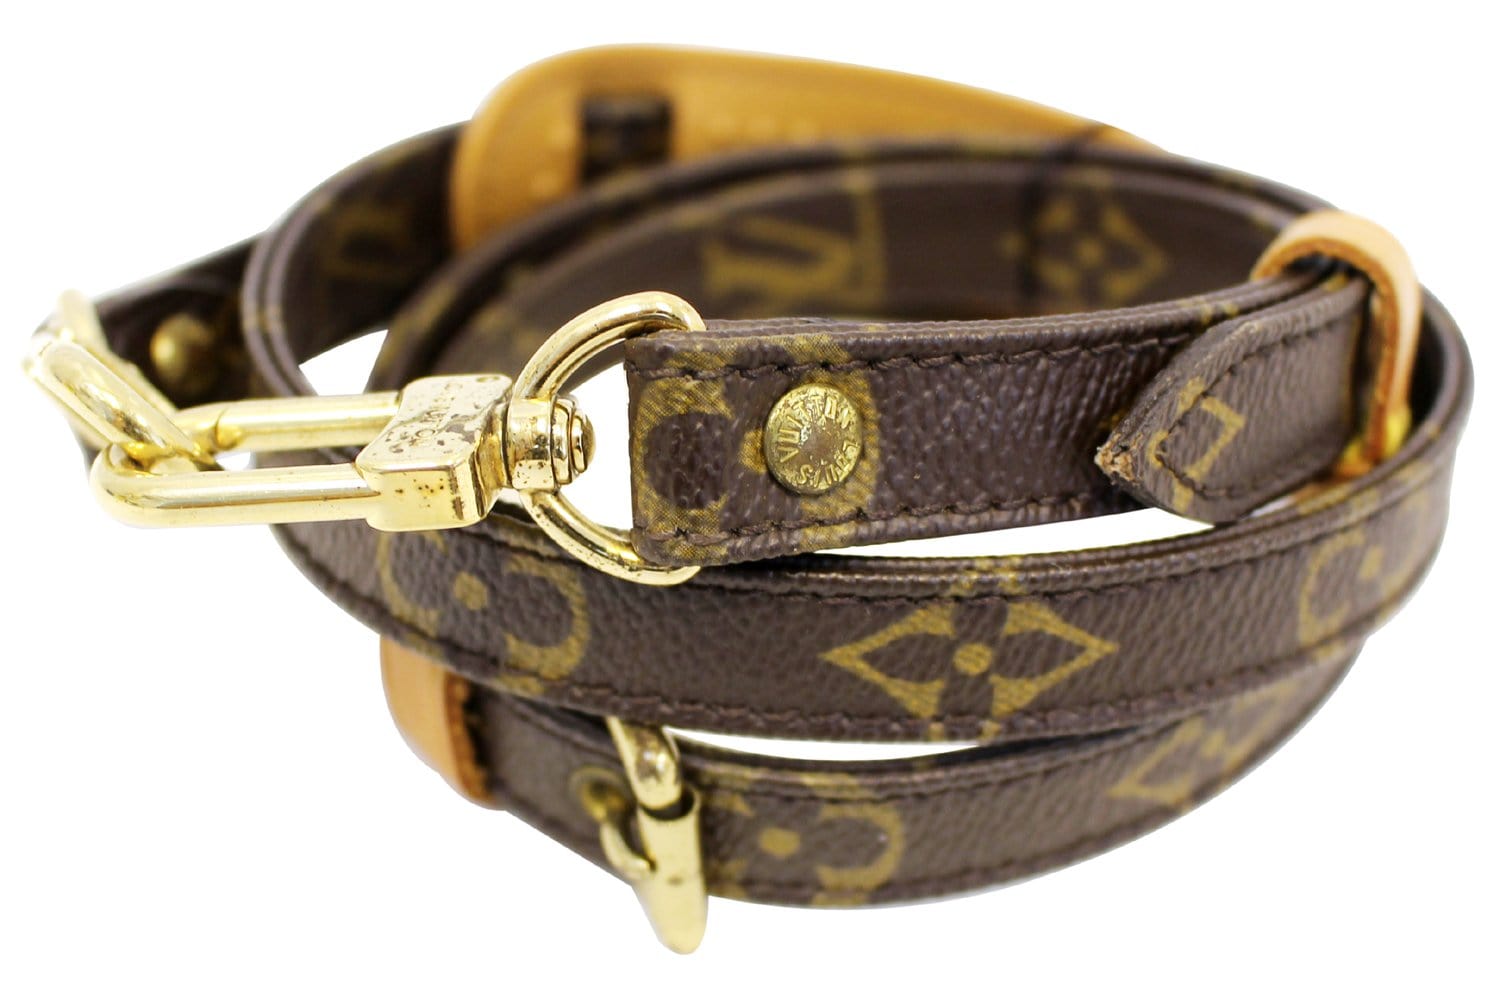 Light Tan Leather Strap with Yellow Stitching for Louis Vuitton (LV), Coach  & More - .75 Wide